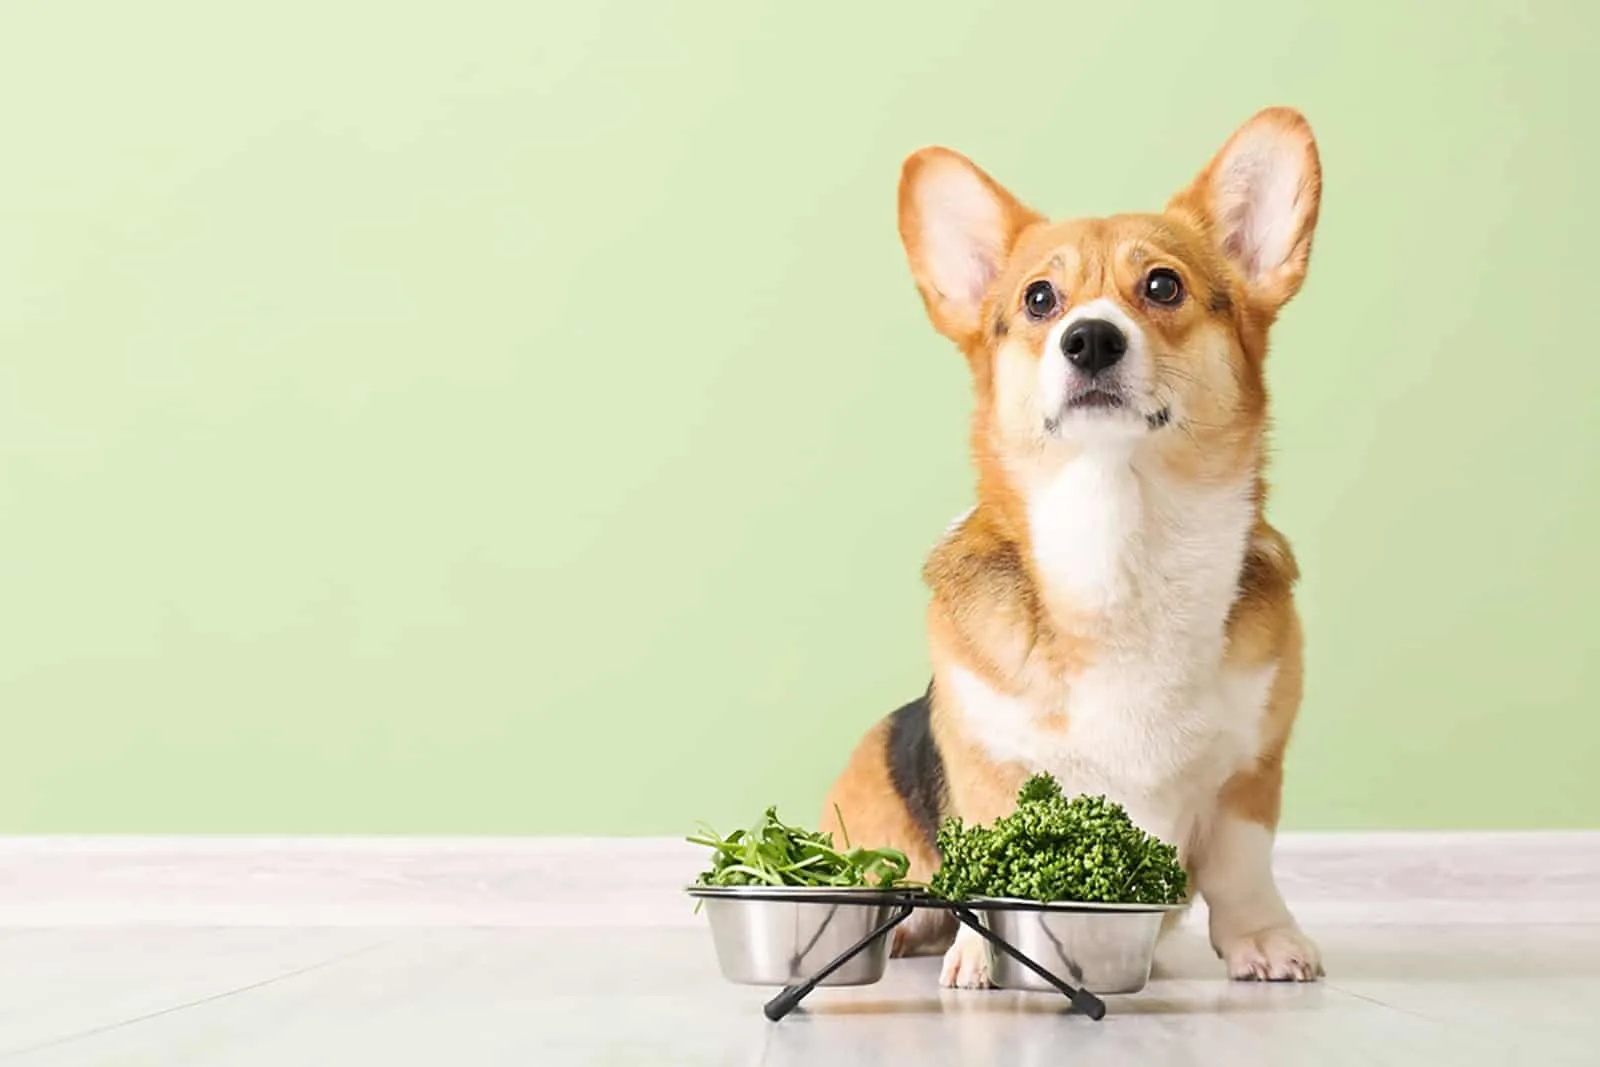 corgi dog with herbs and vegetables in the bowl